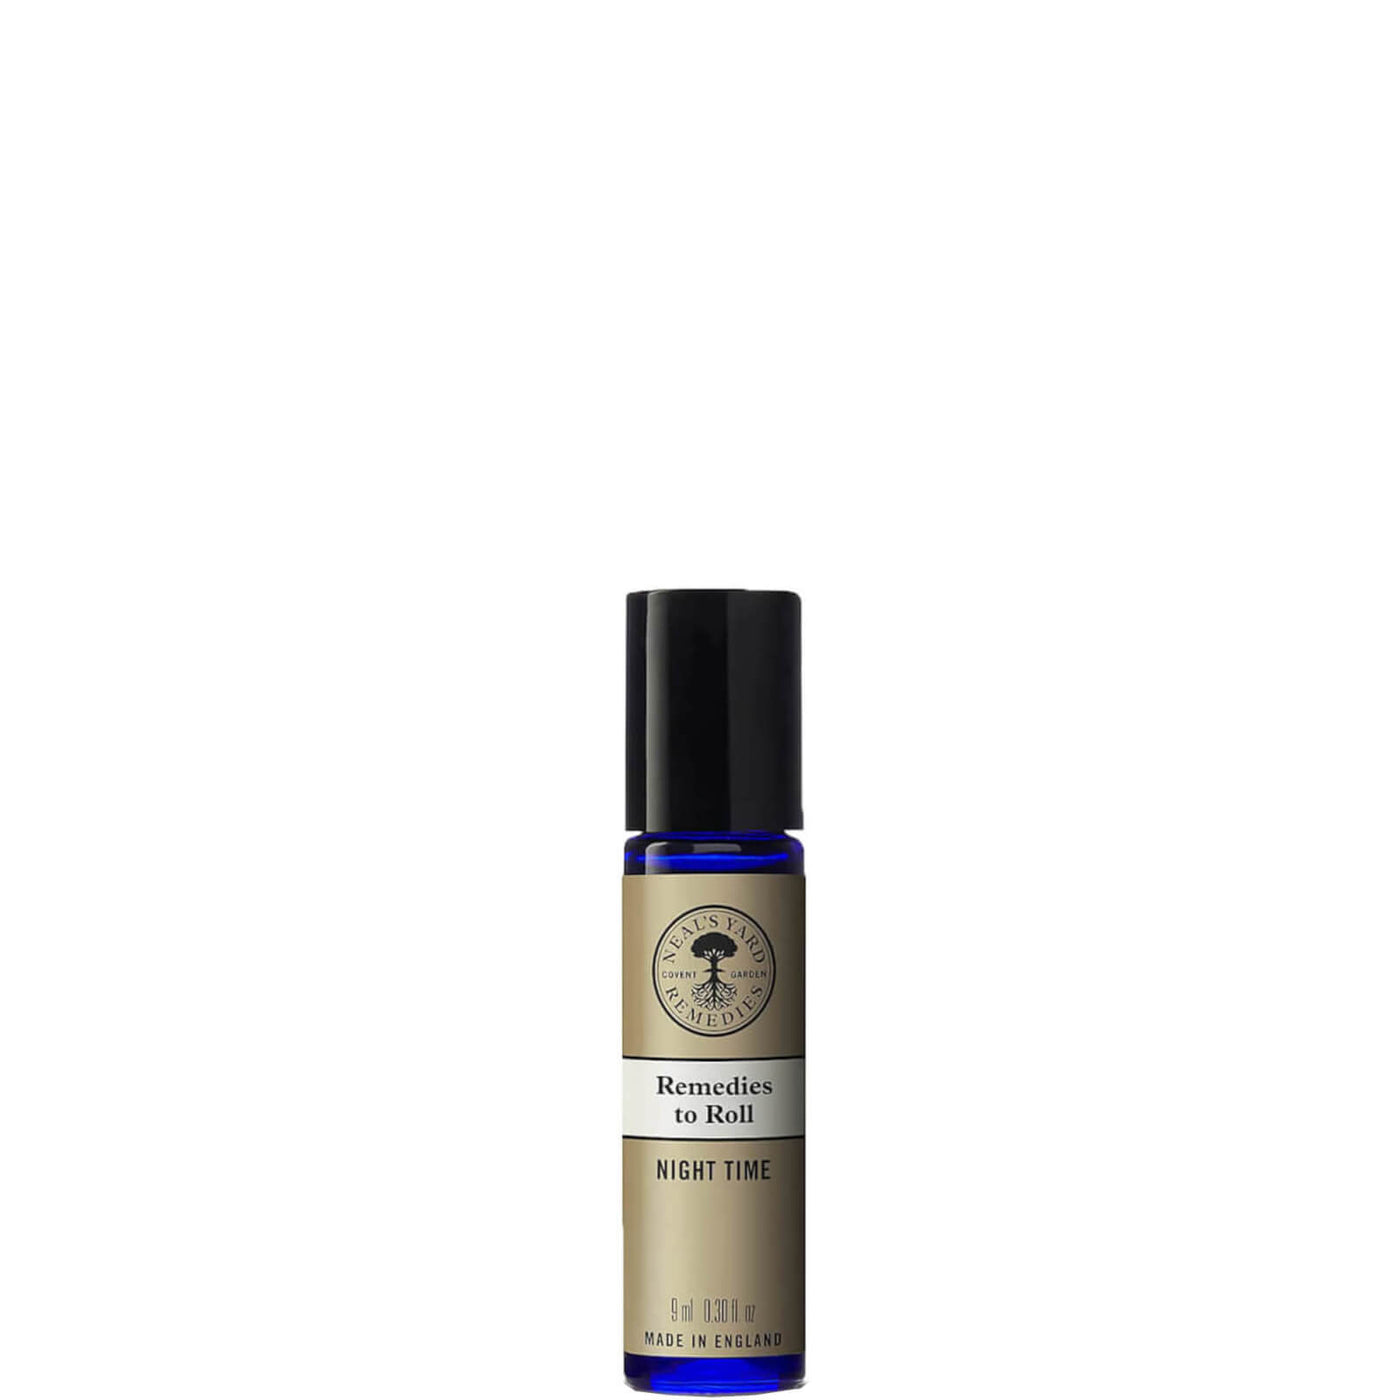 Neal's Yard Remedies to Roll Night Time Blend 9ml